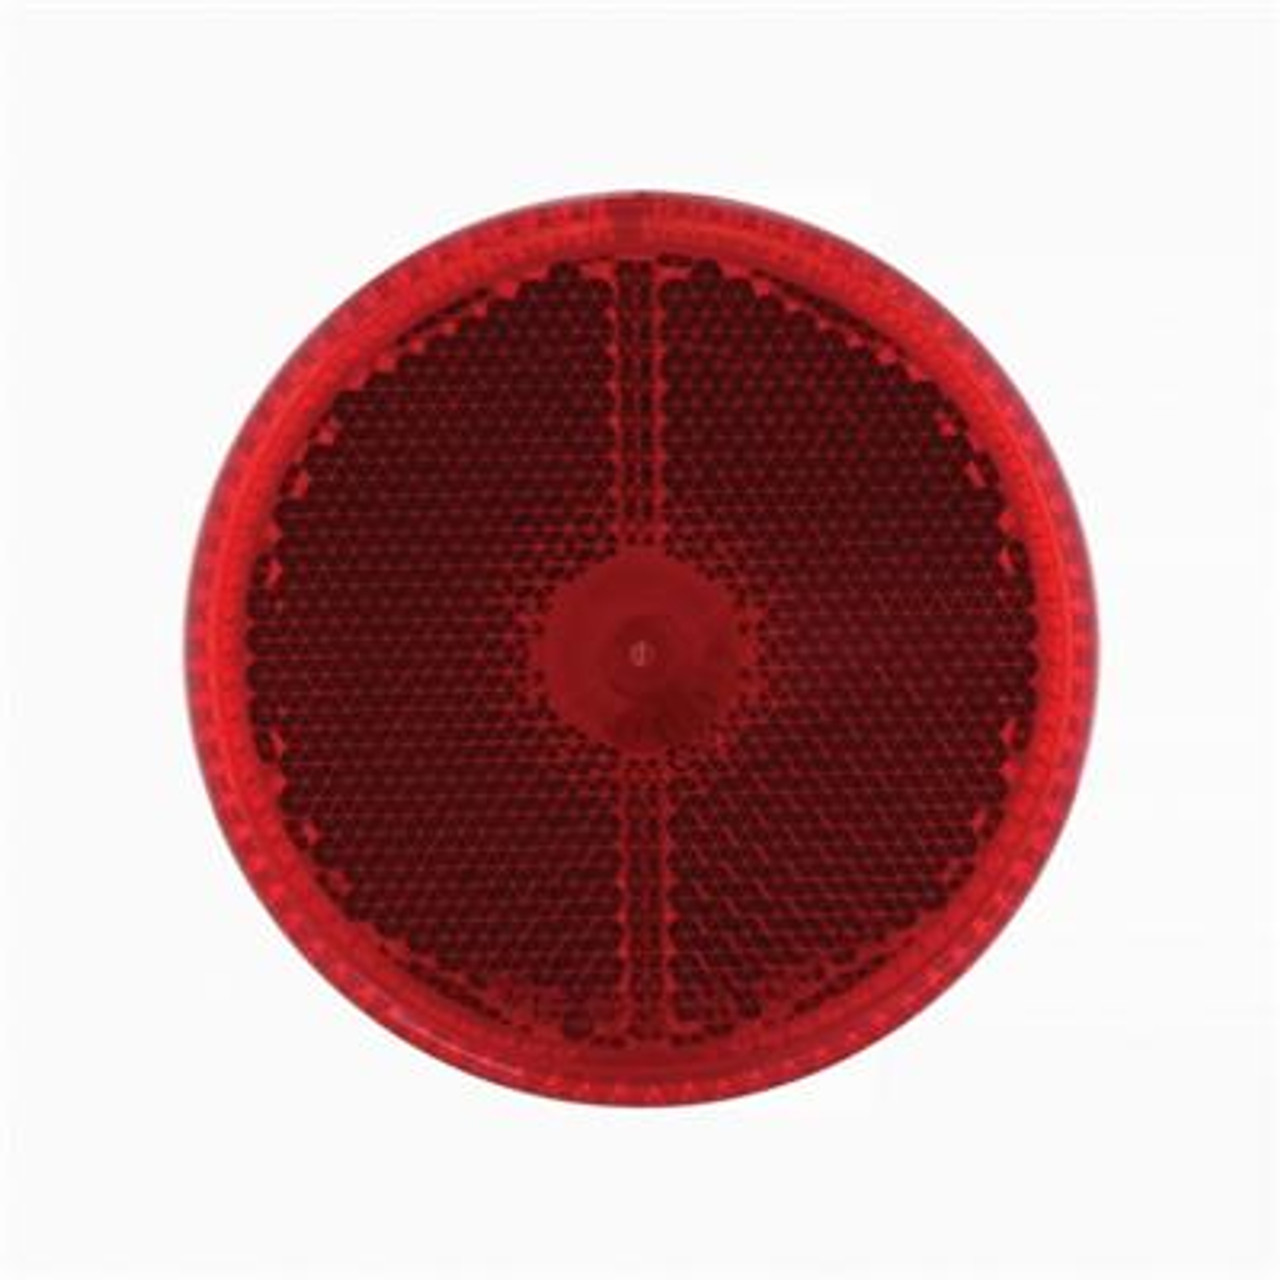 2-1/2" Round Reflectorized Light (Clearance/Marker) - Red Lens